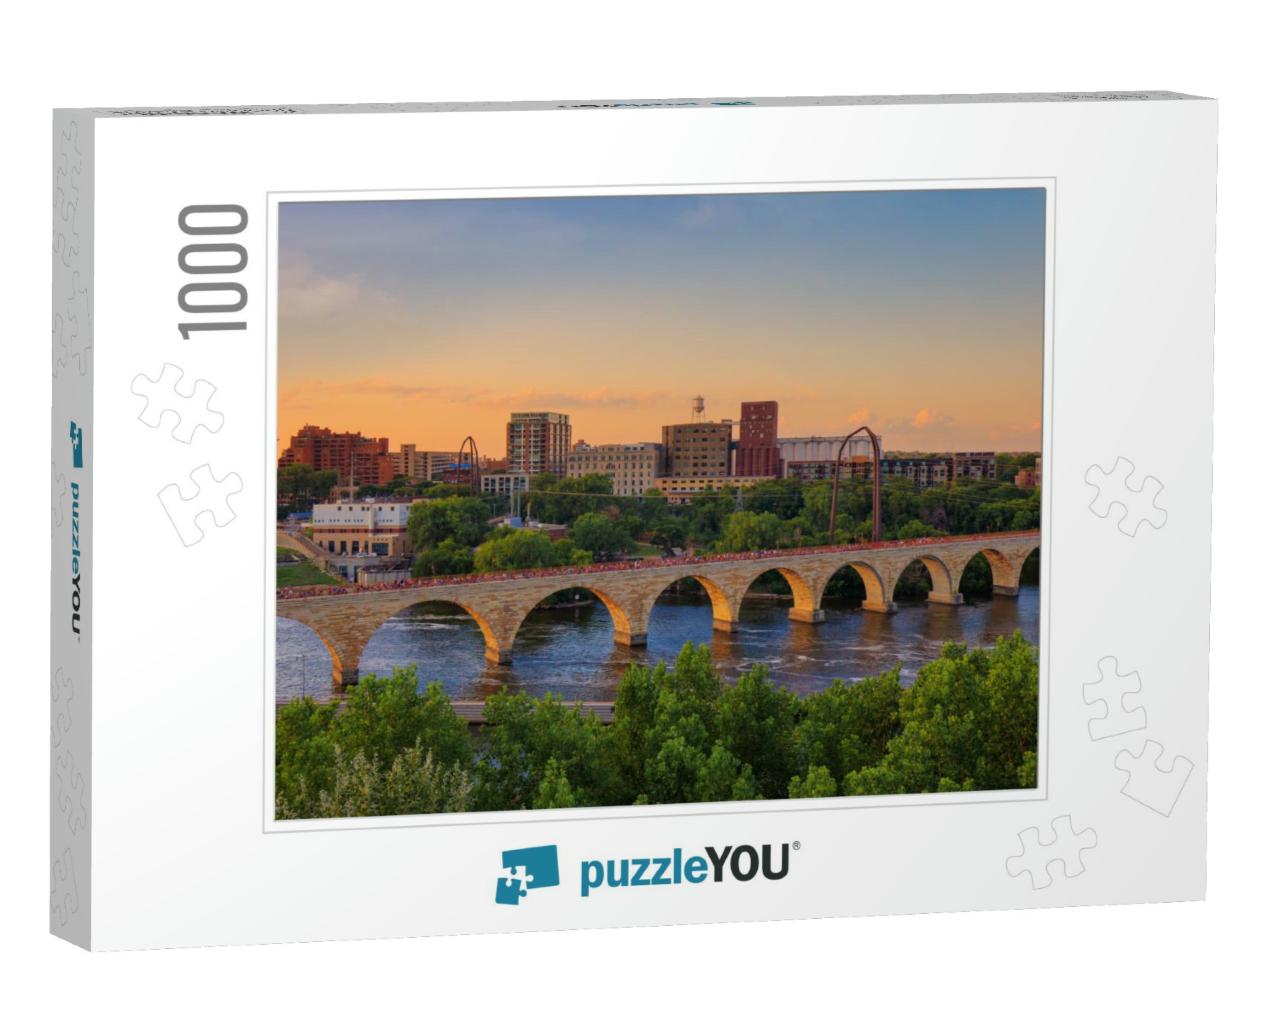 Minneapolis Minnesota At Sunset on the Mississippi River... Jigsaw Puzzle with 1000 pieces